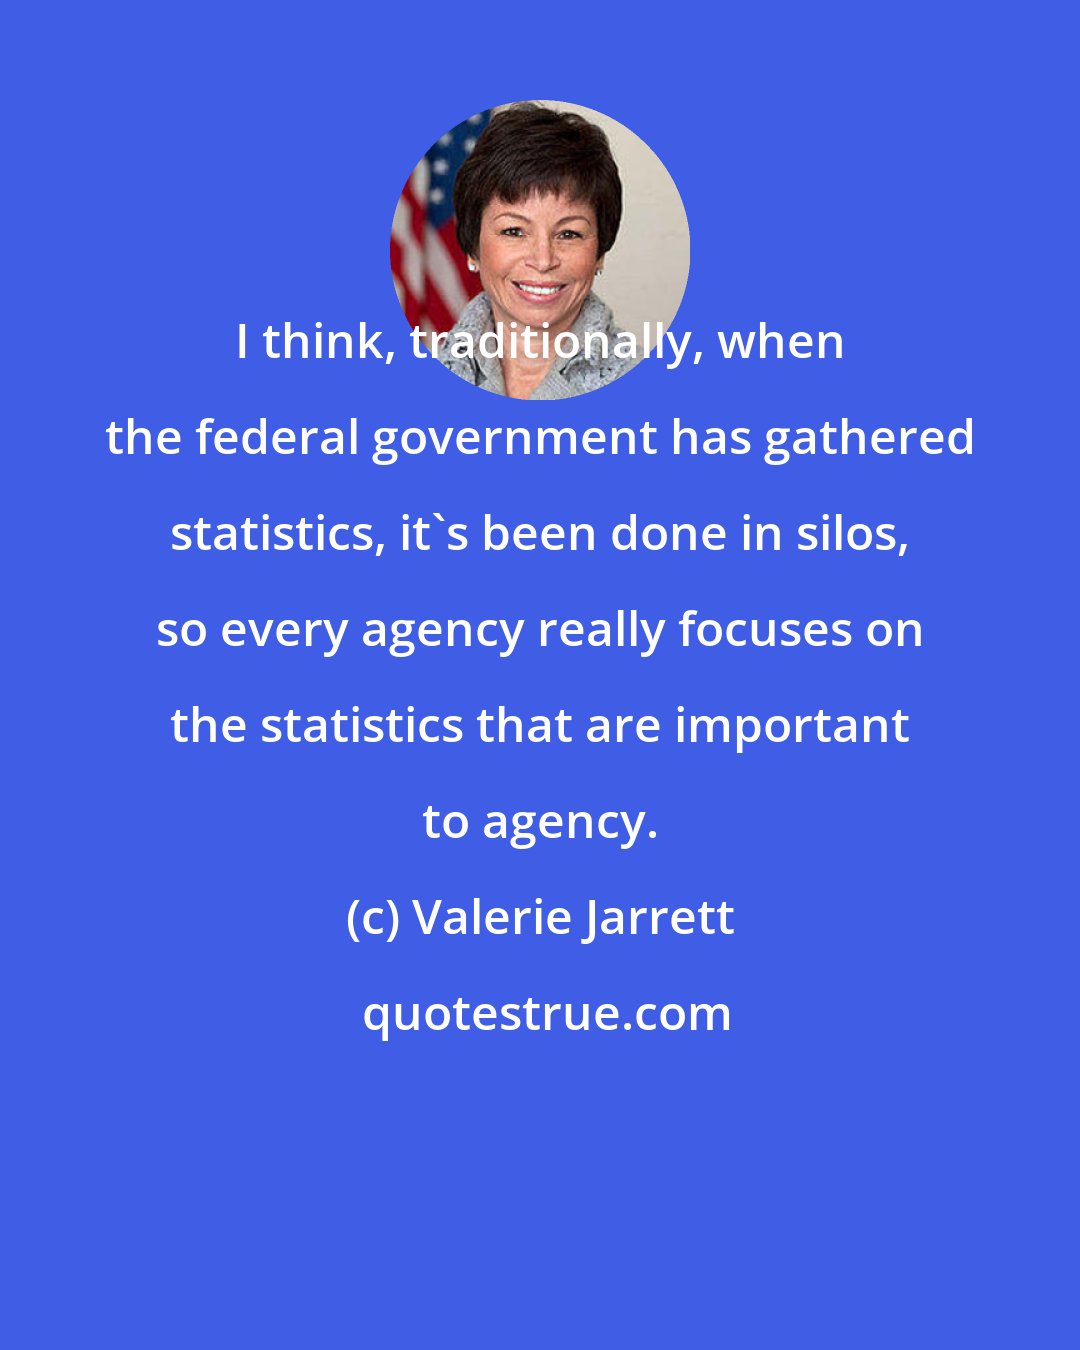 Valerie Jarrett: I think, traditionally, when the federal government has gathered statistics, it's been done in silos, so every agency really focuses on the statistics that are important to agency.